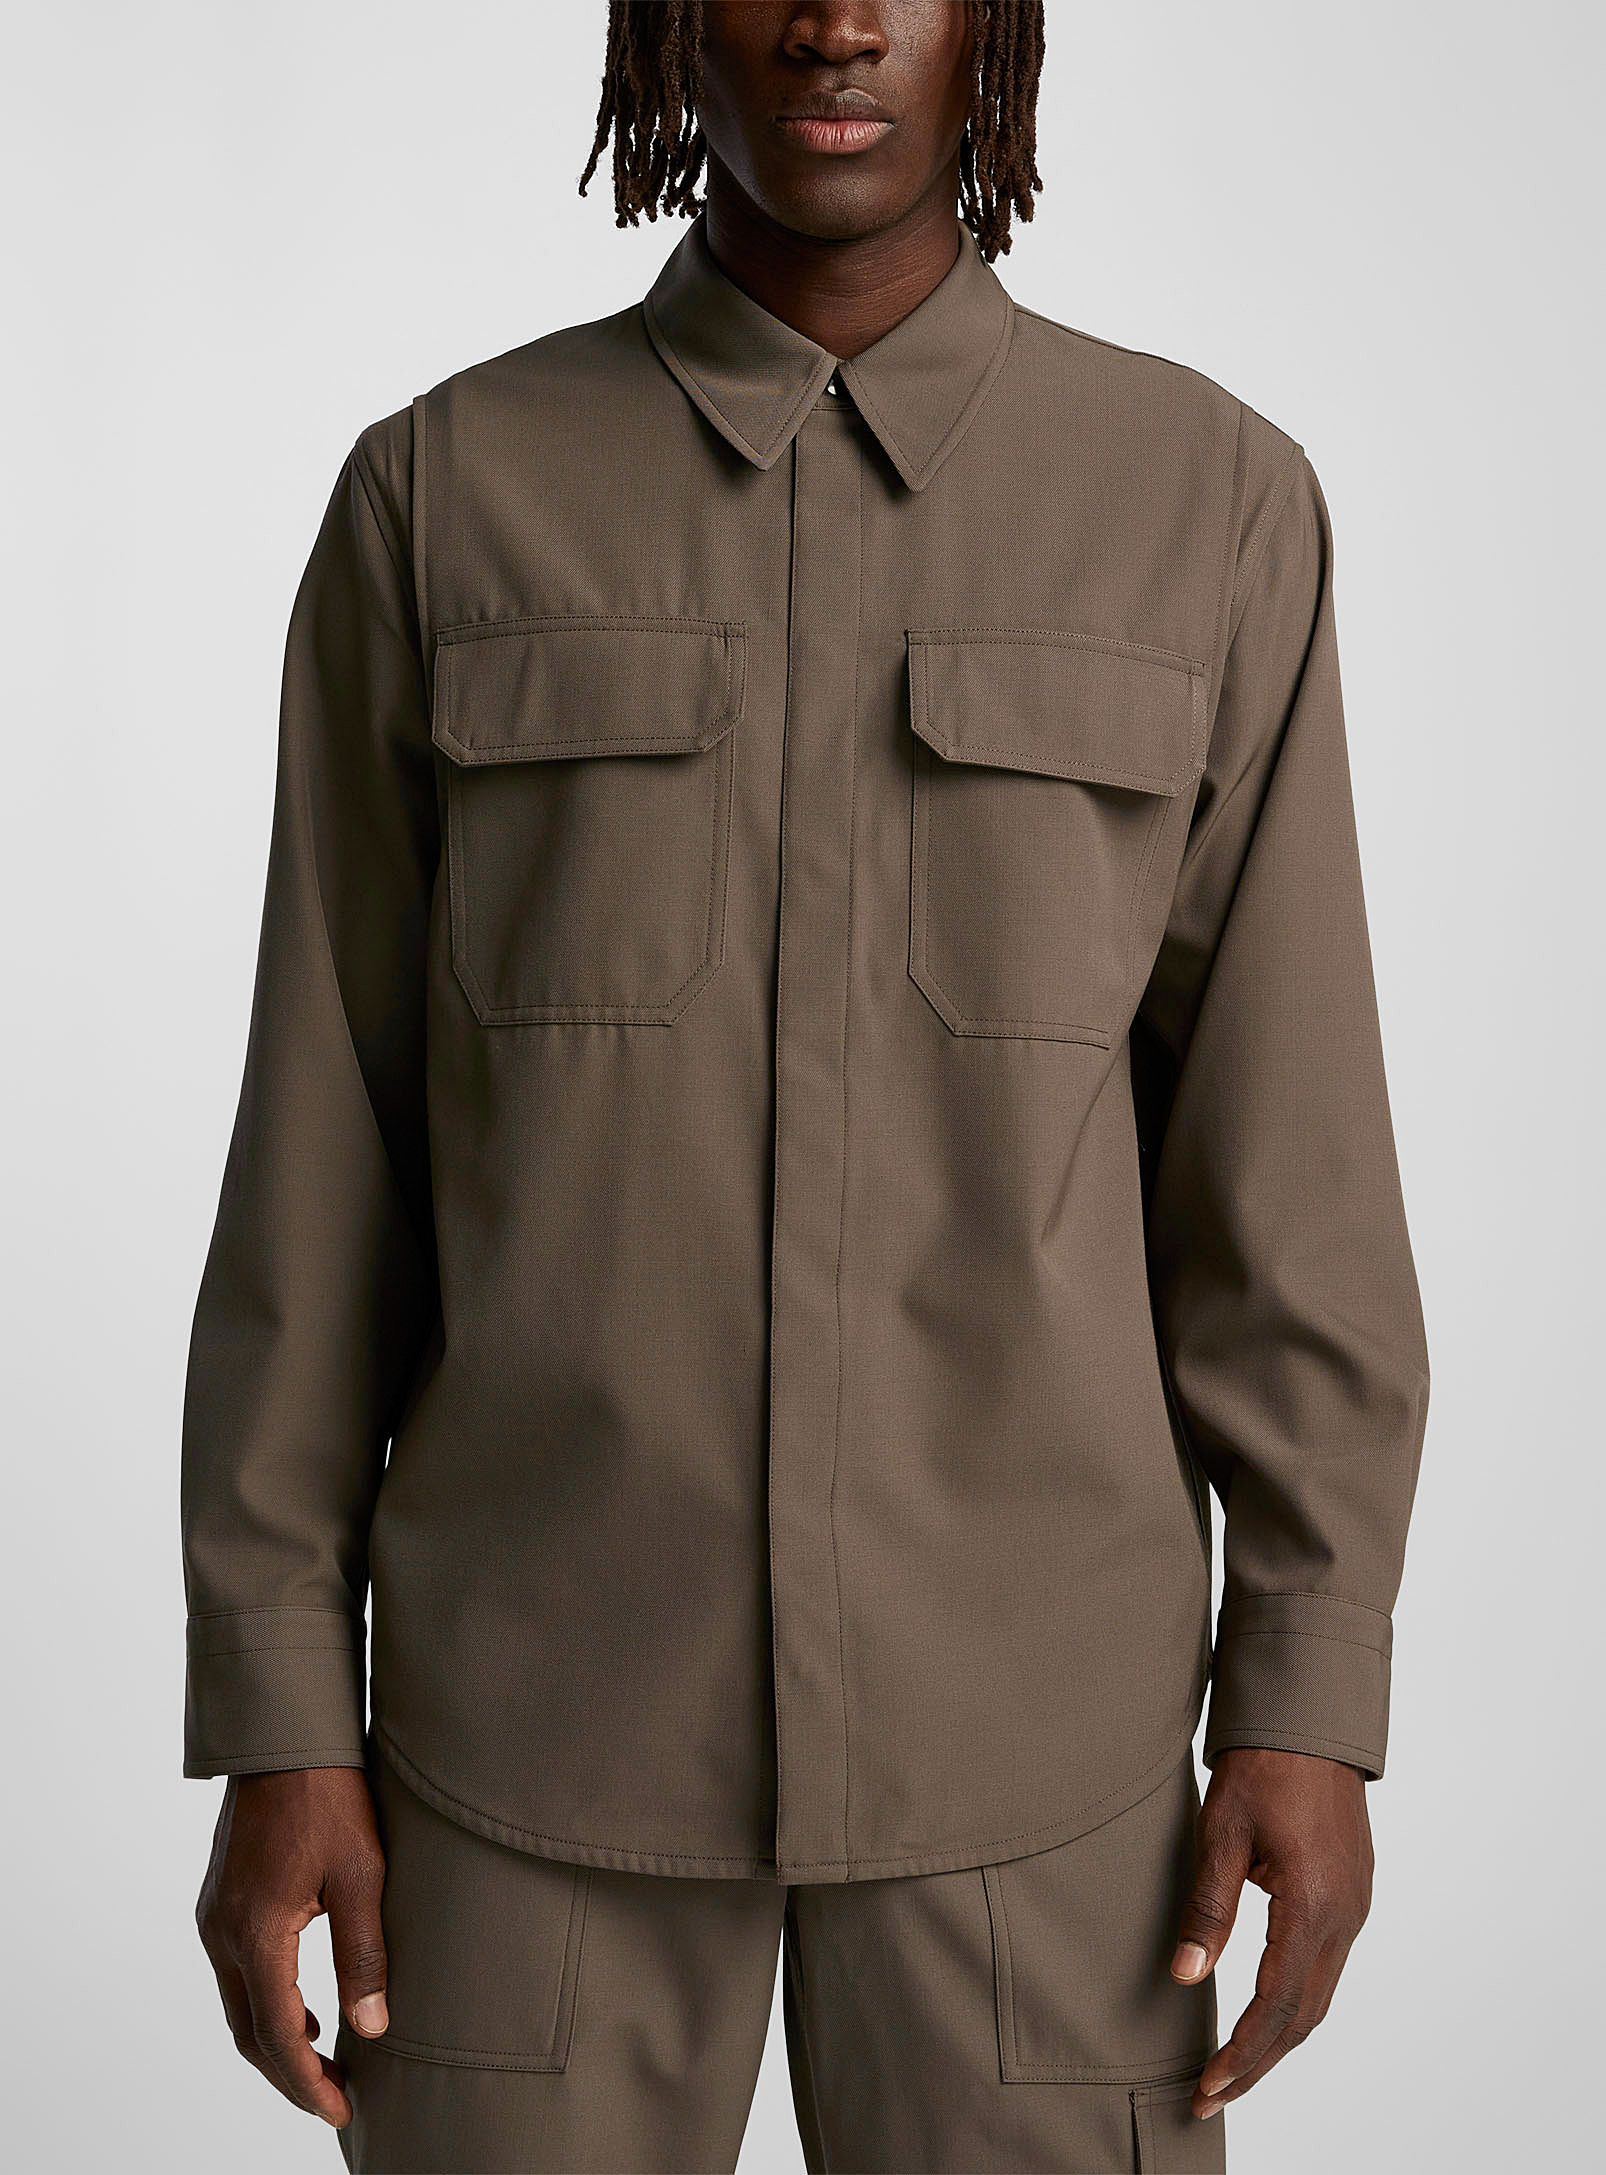 Helmut Lang - Men's Patch pockets military shirt | Square One